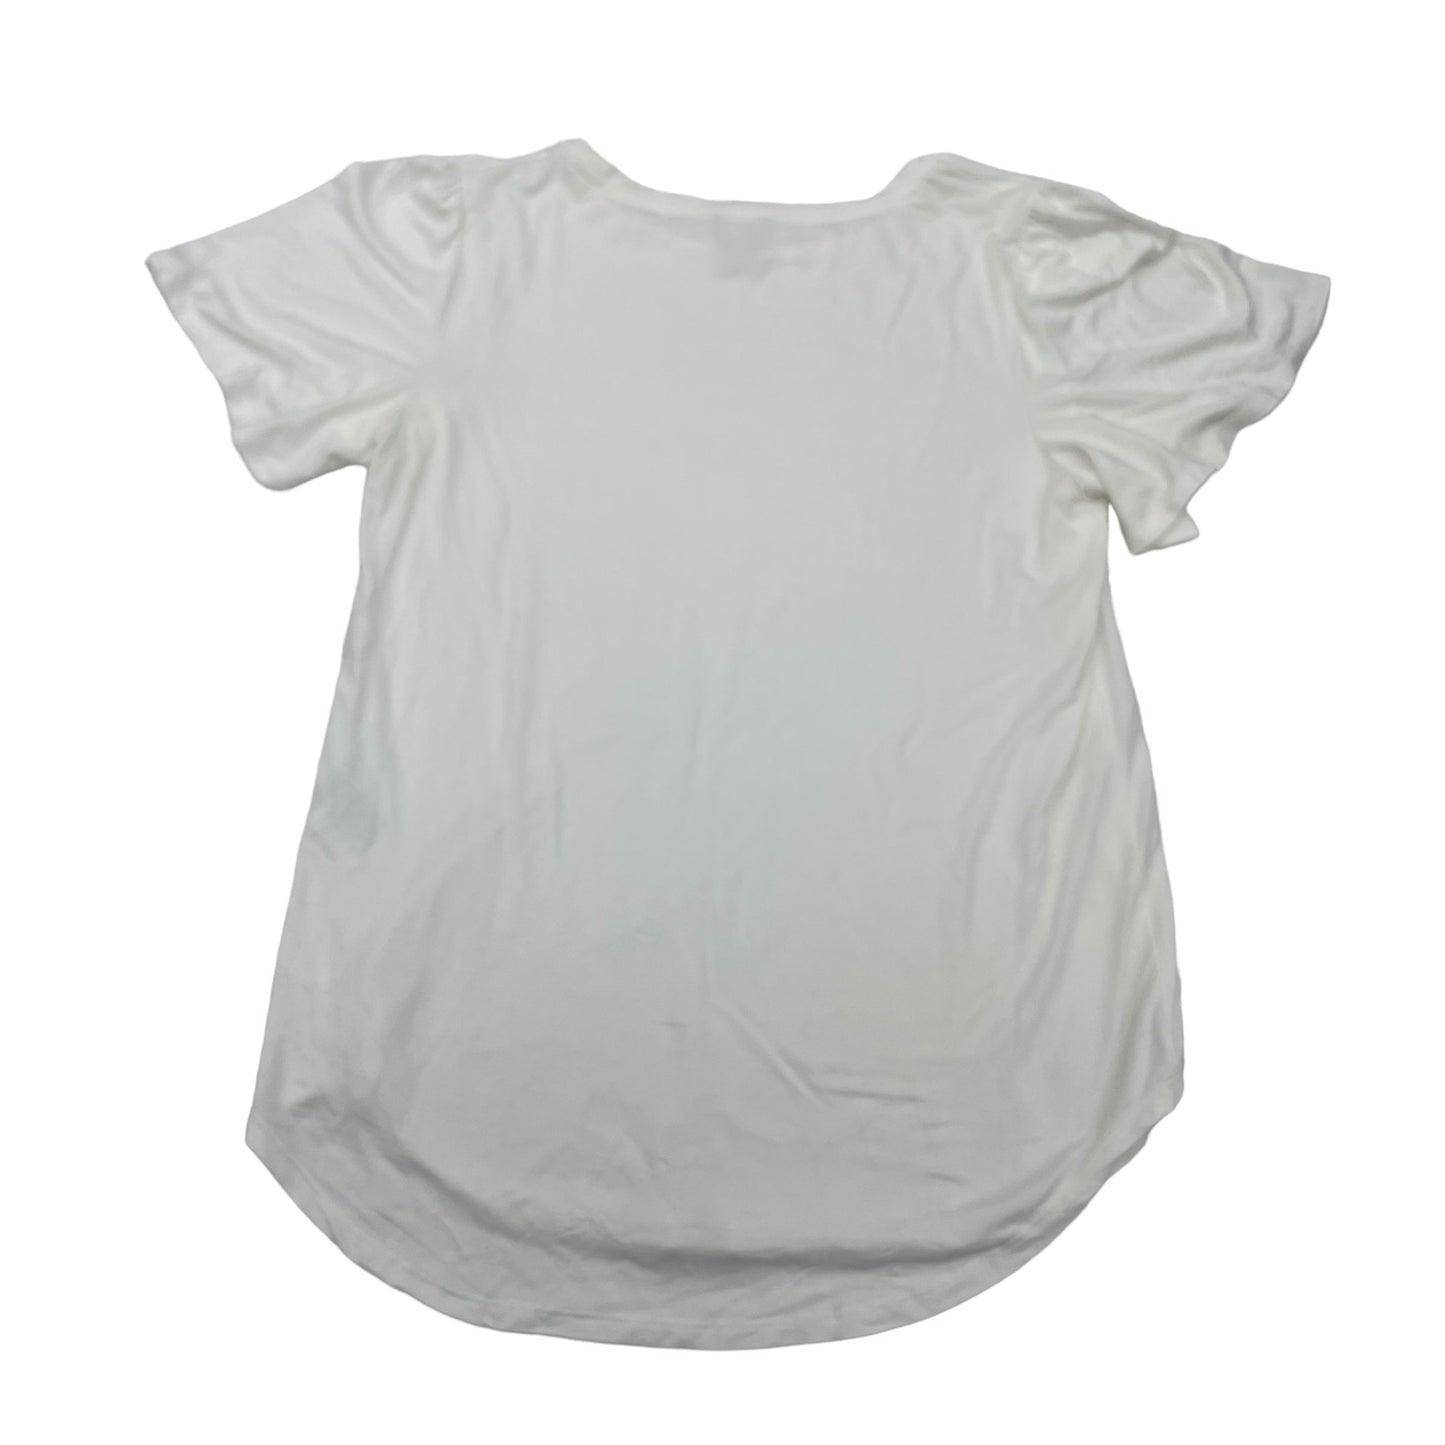 WHITE TOP SS BASIC by CHICOS Size:S